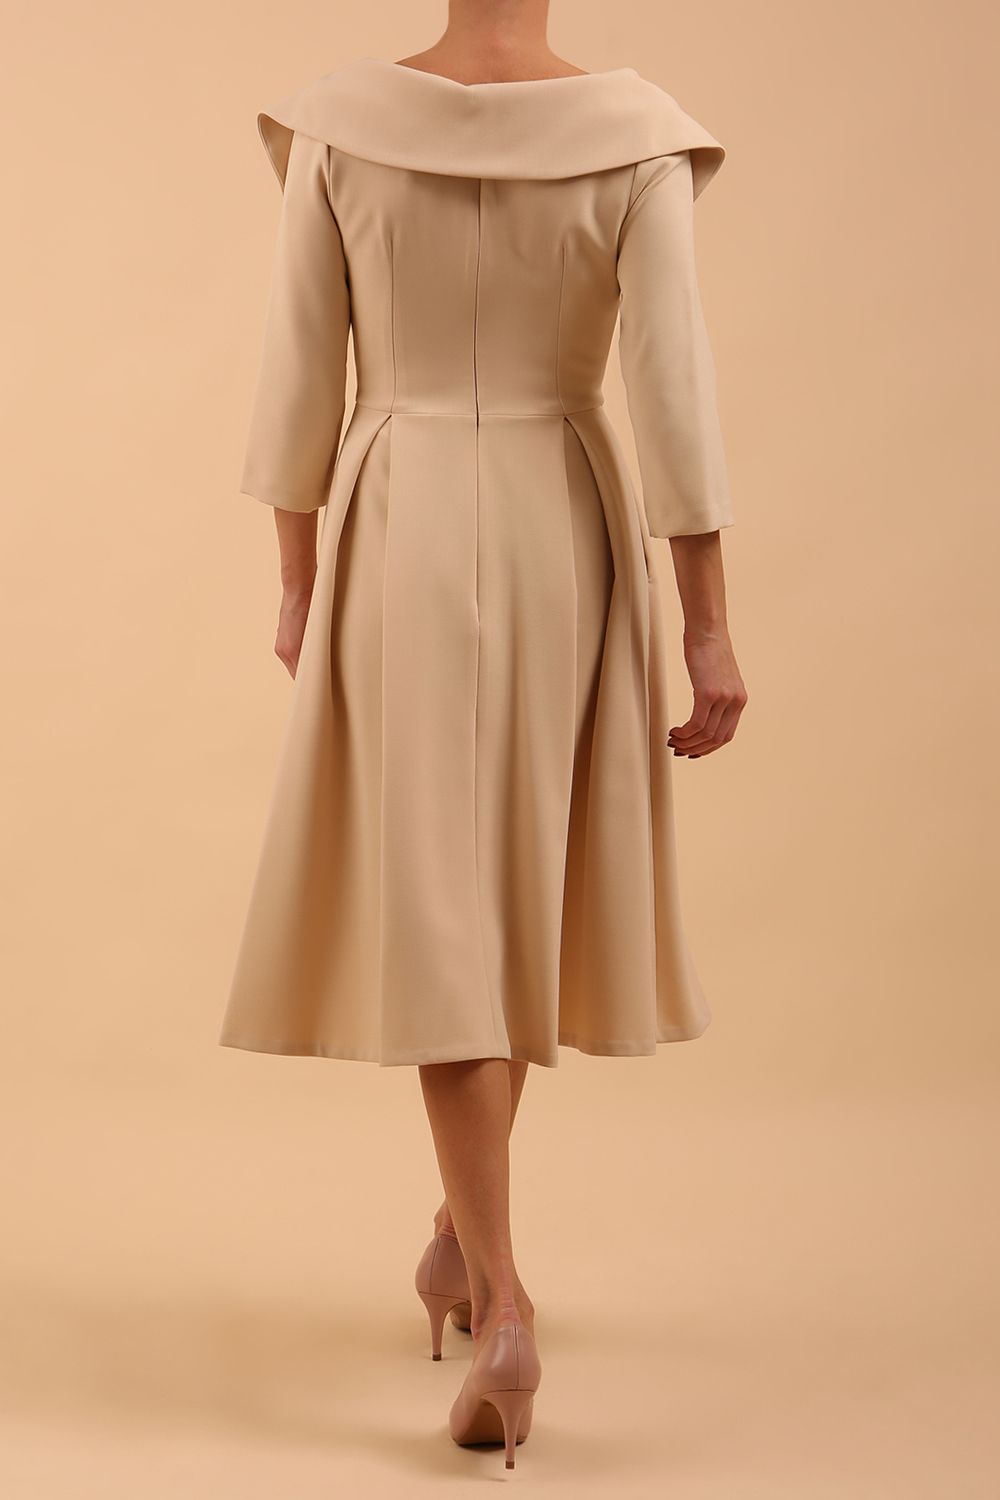 Brunette model is wearing a sleeved sandshell beige oversized collar swing dress with button detail at the front and pockets in the skirt